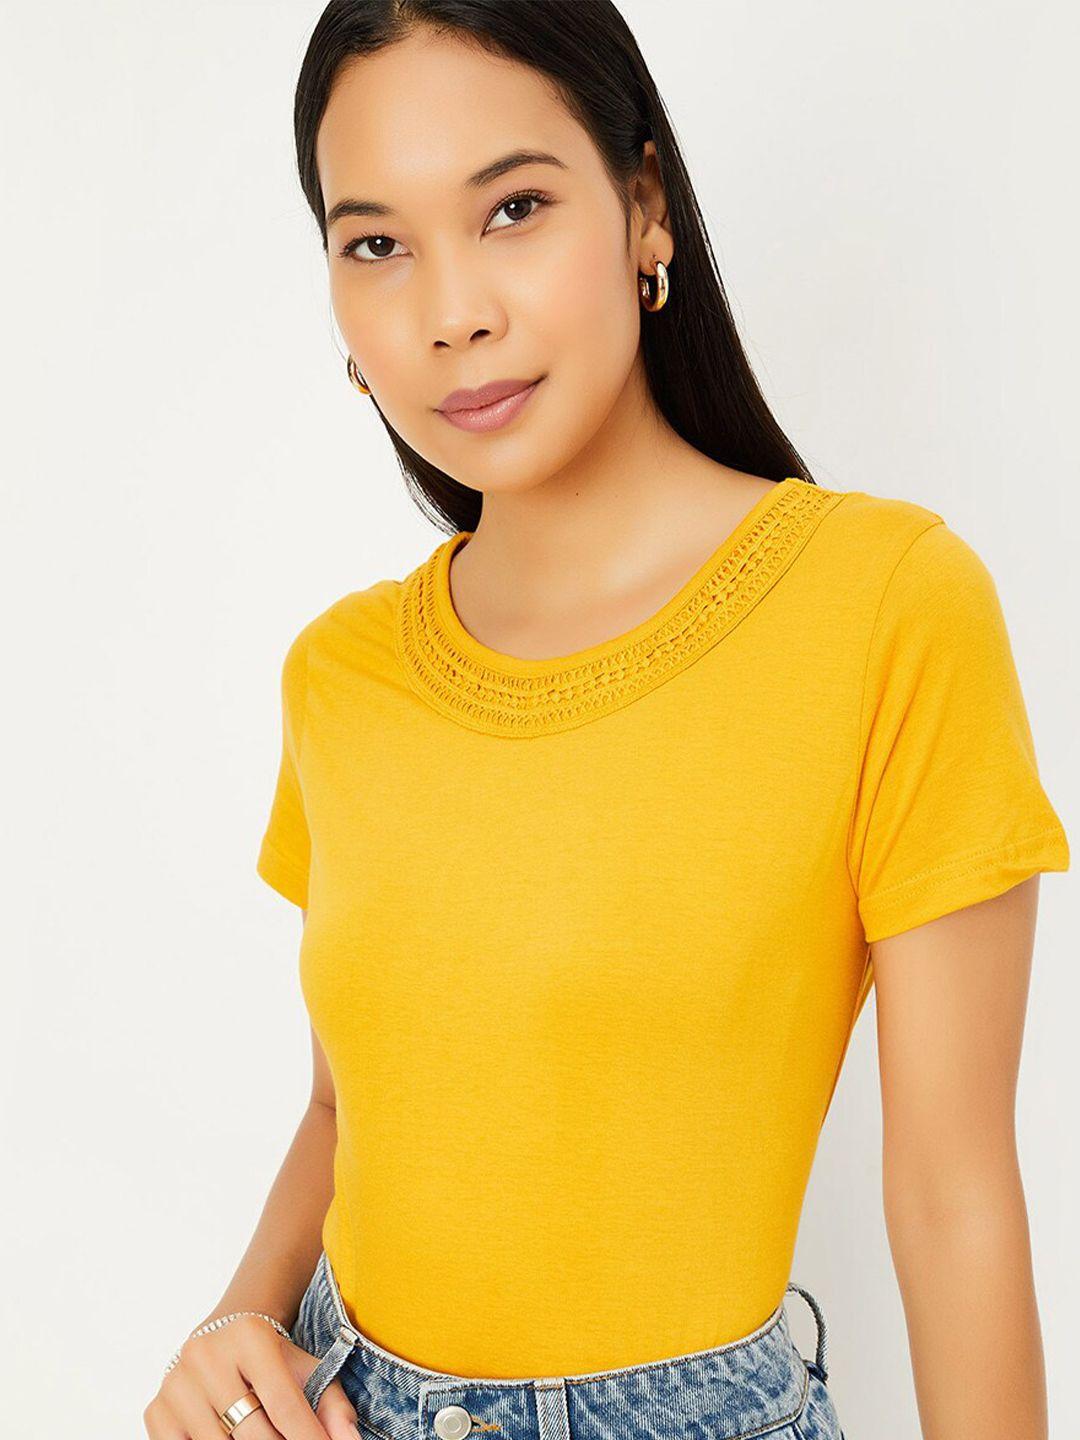 max round neck short sleeves cotton top